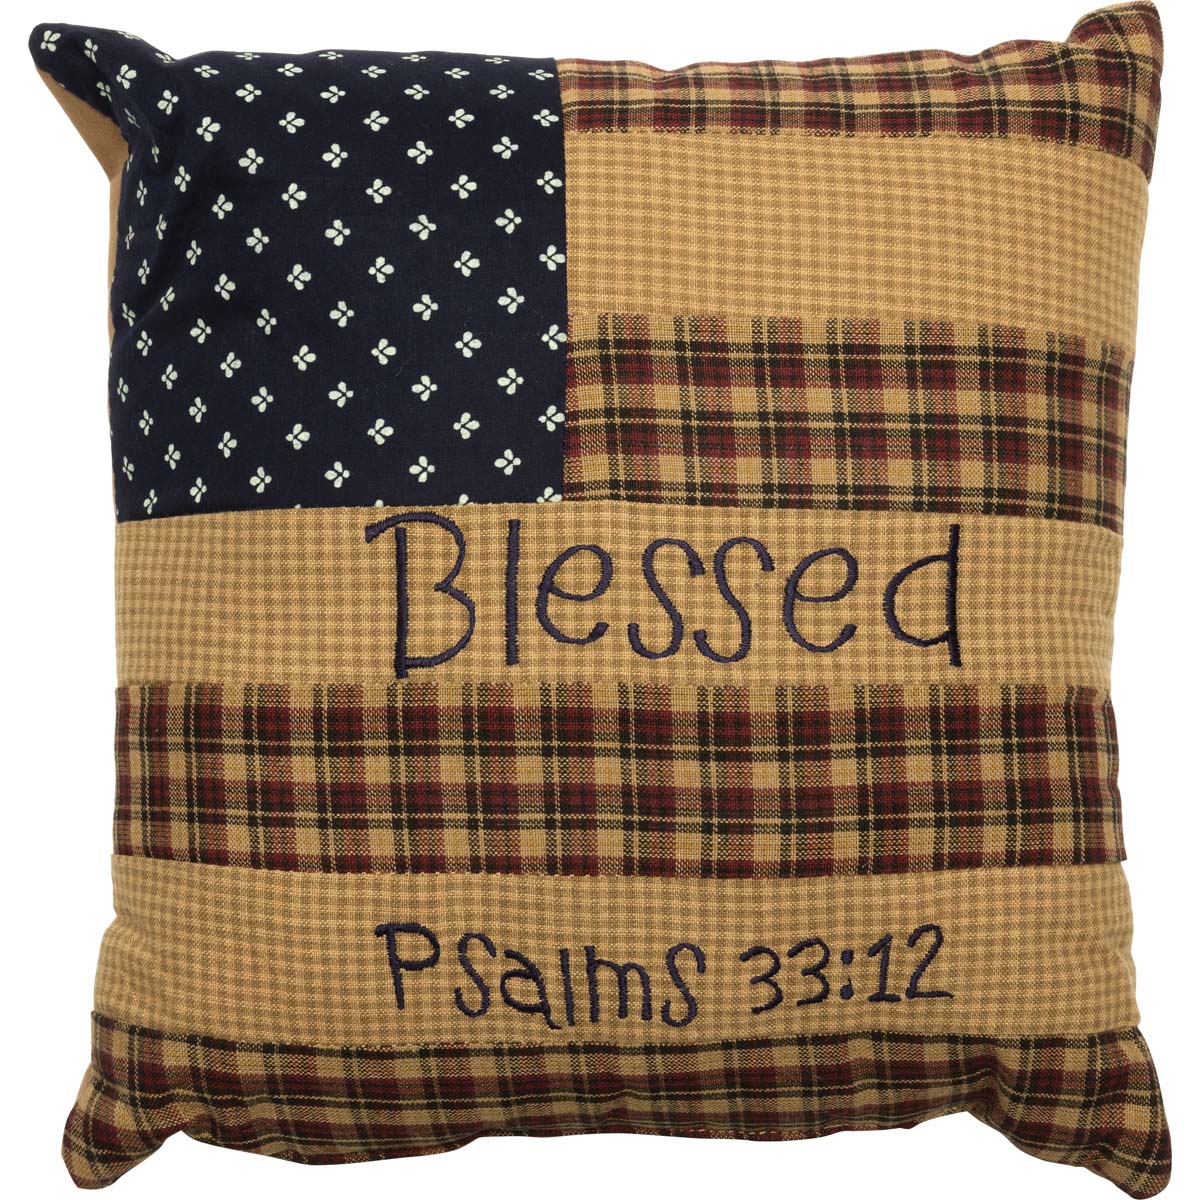 7708-Patriotic-Patch-Pillow-Blessed-10x10-image-4